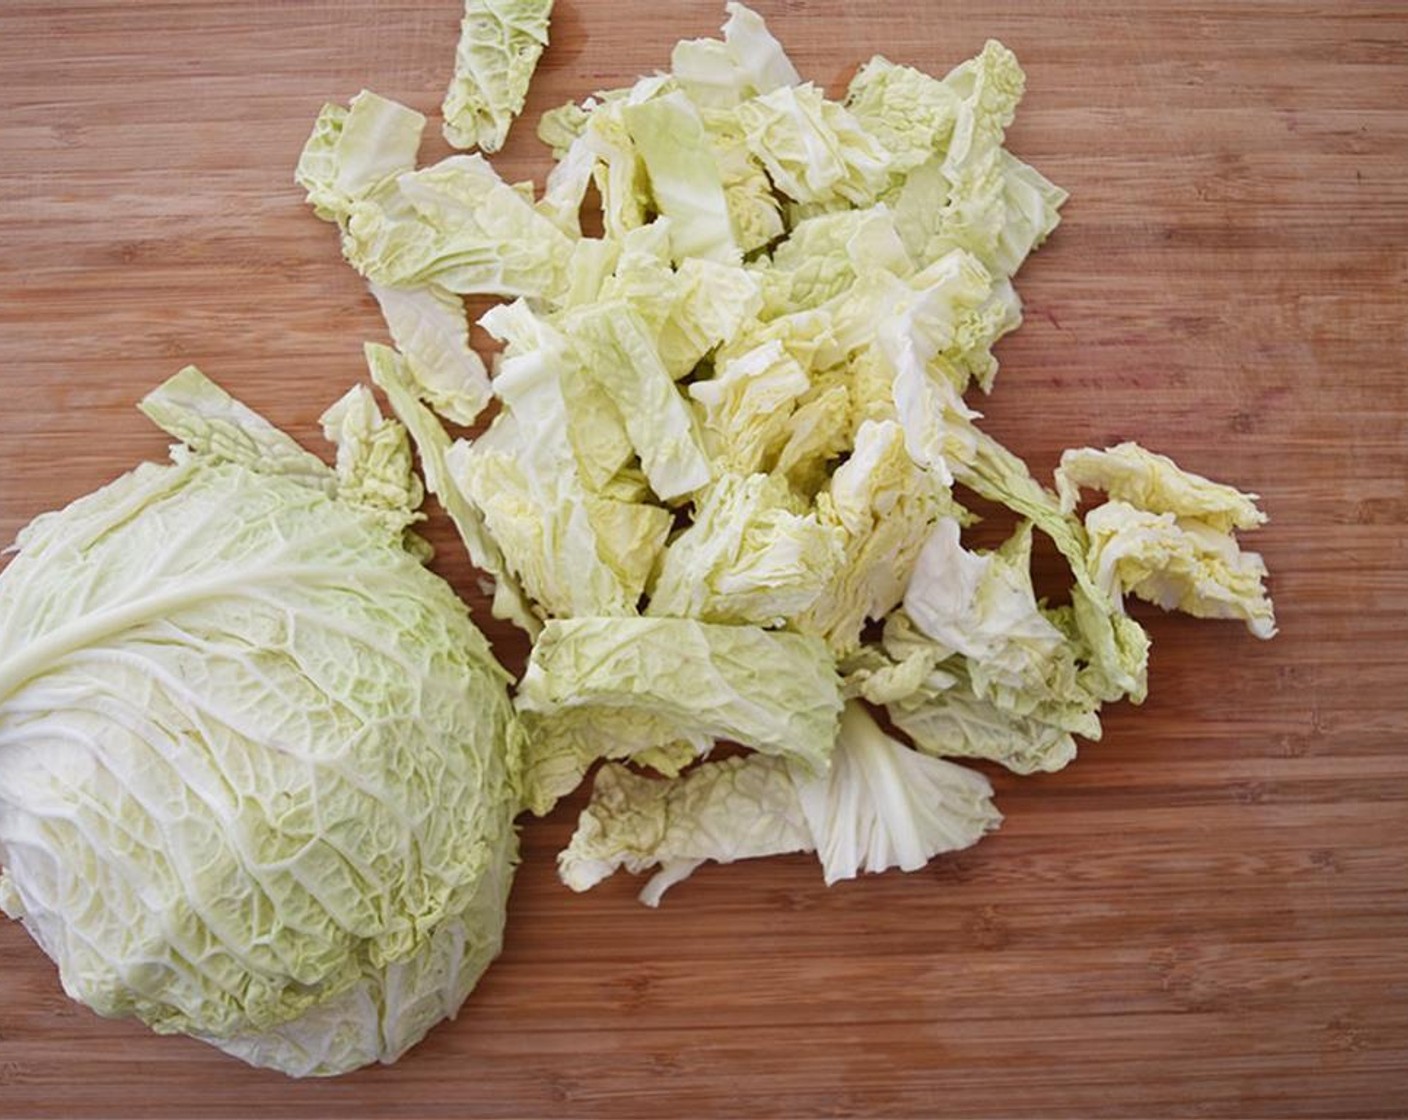 step 3 Chop the Green Cabbage (1 head) and add to the soup with 2 tablespoons of Unsalted Butter (2 Tbsp). Cook for another 20 minutes.